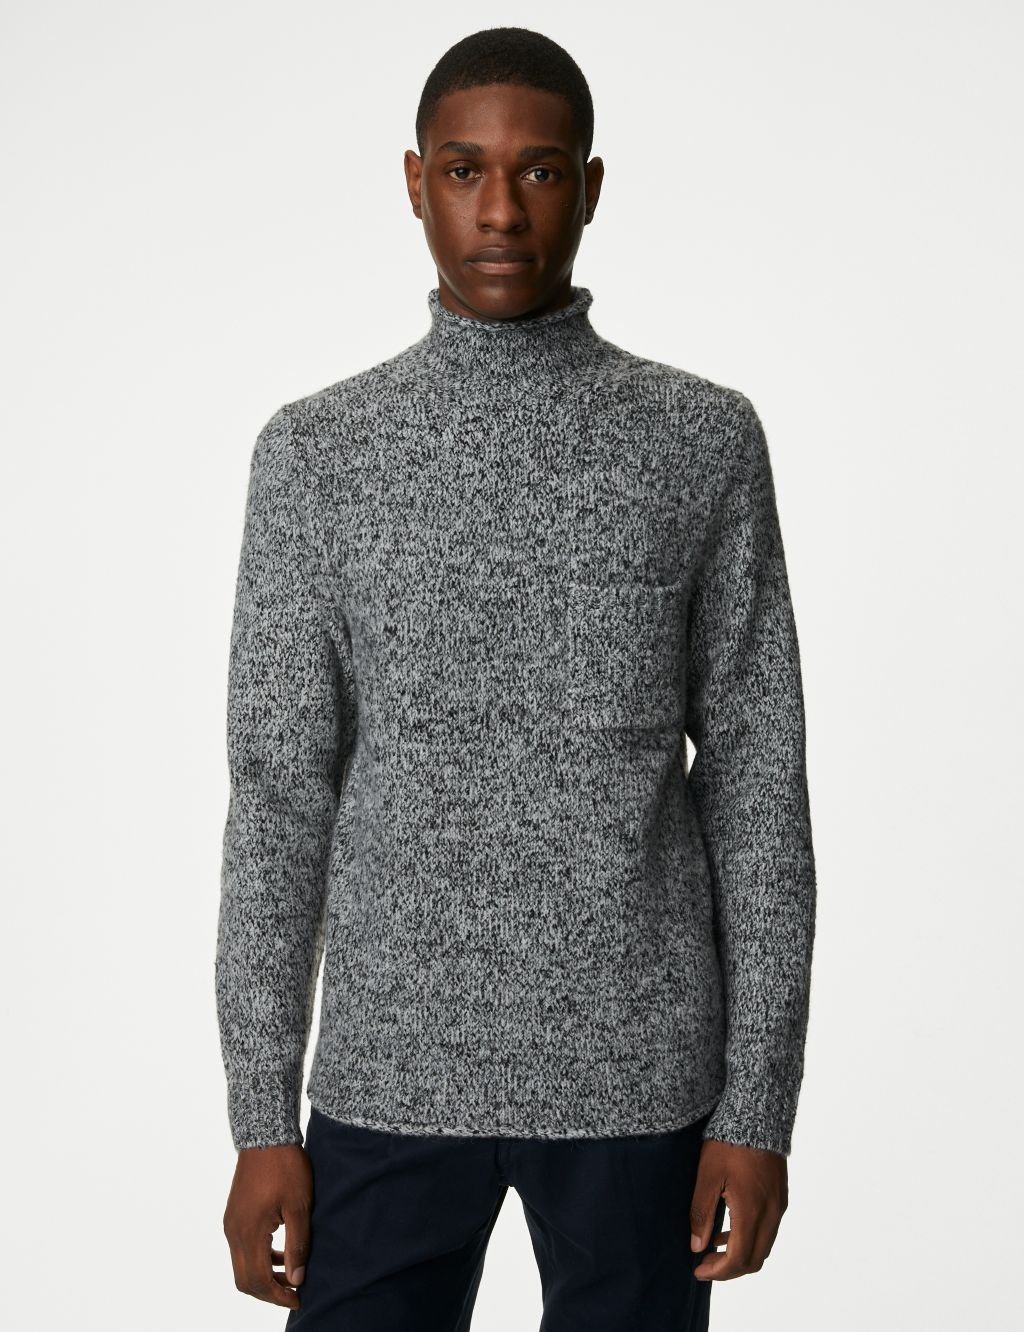 Chunky High Neck Jumper image 4